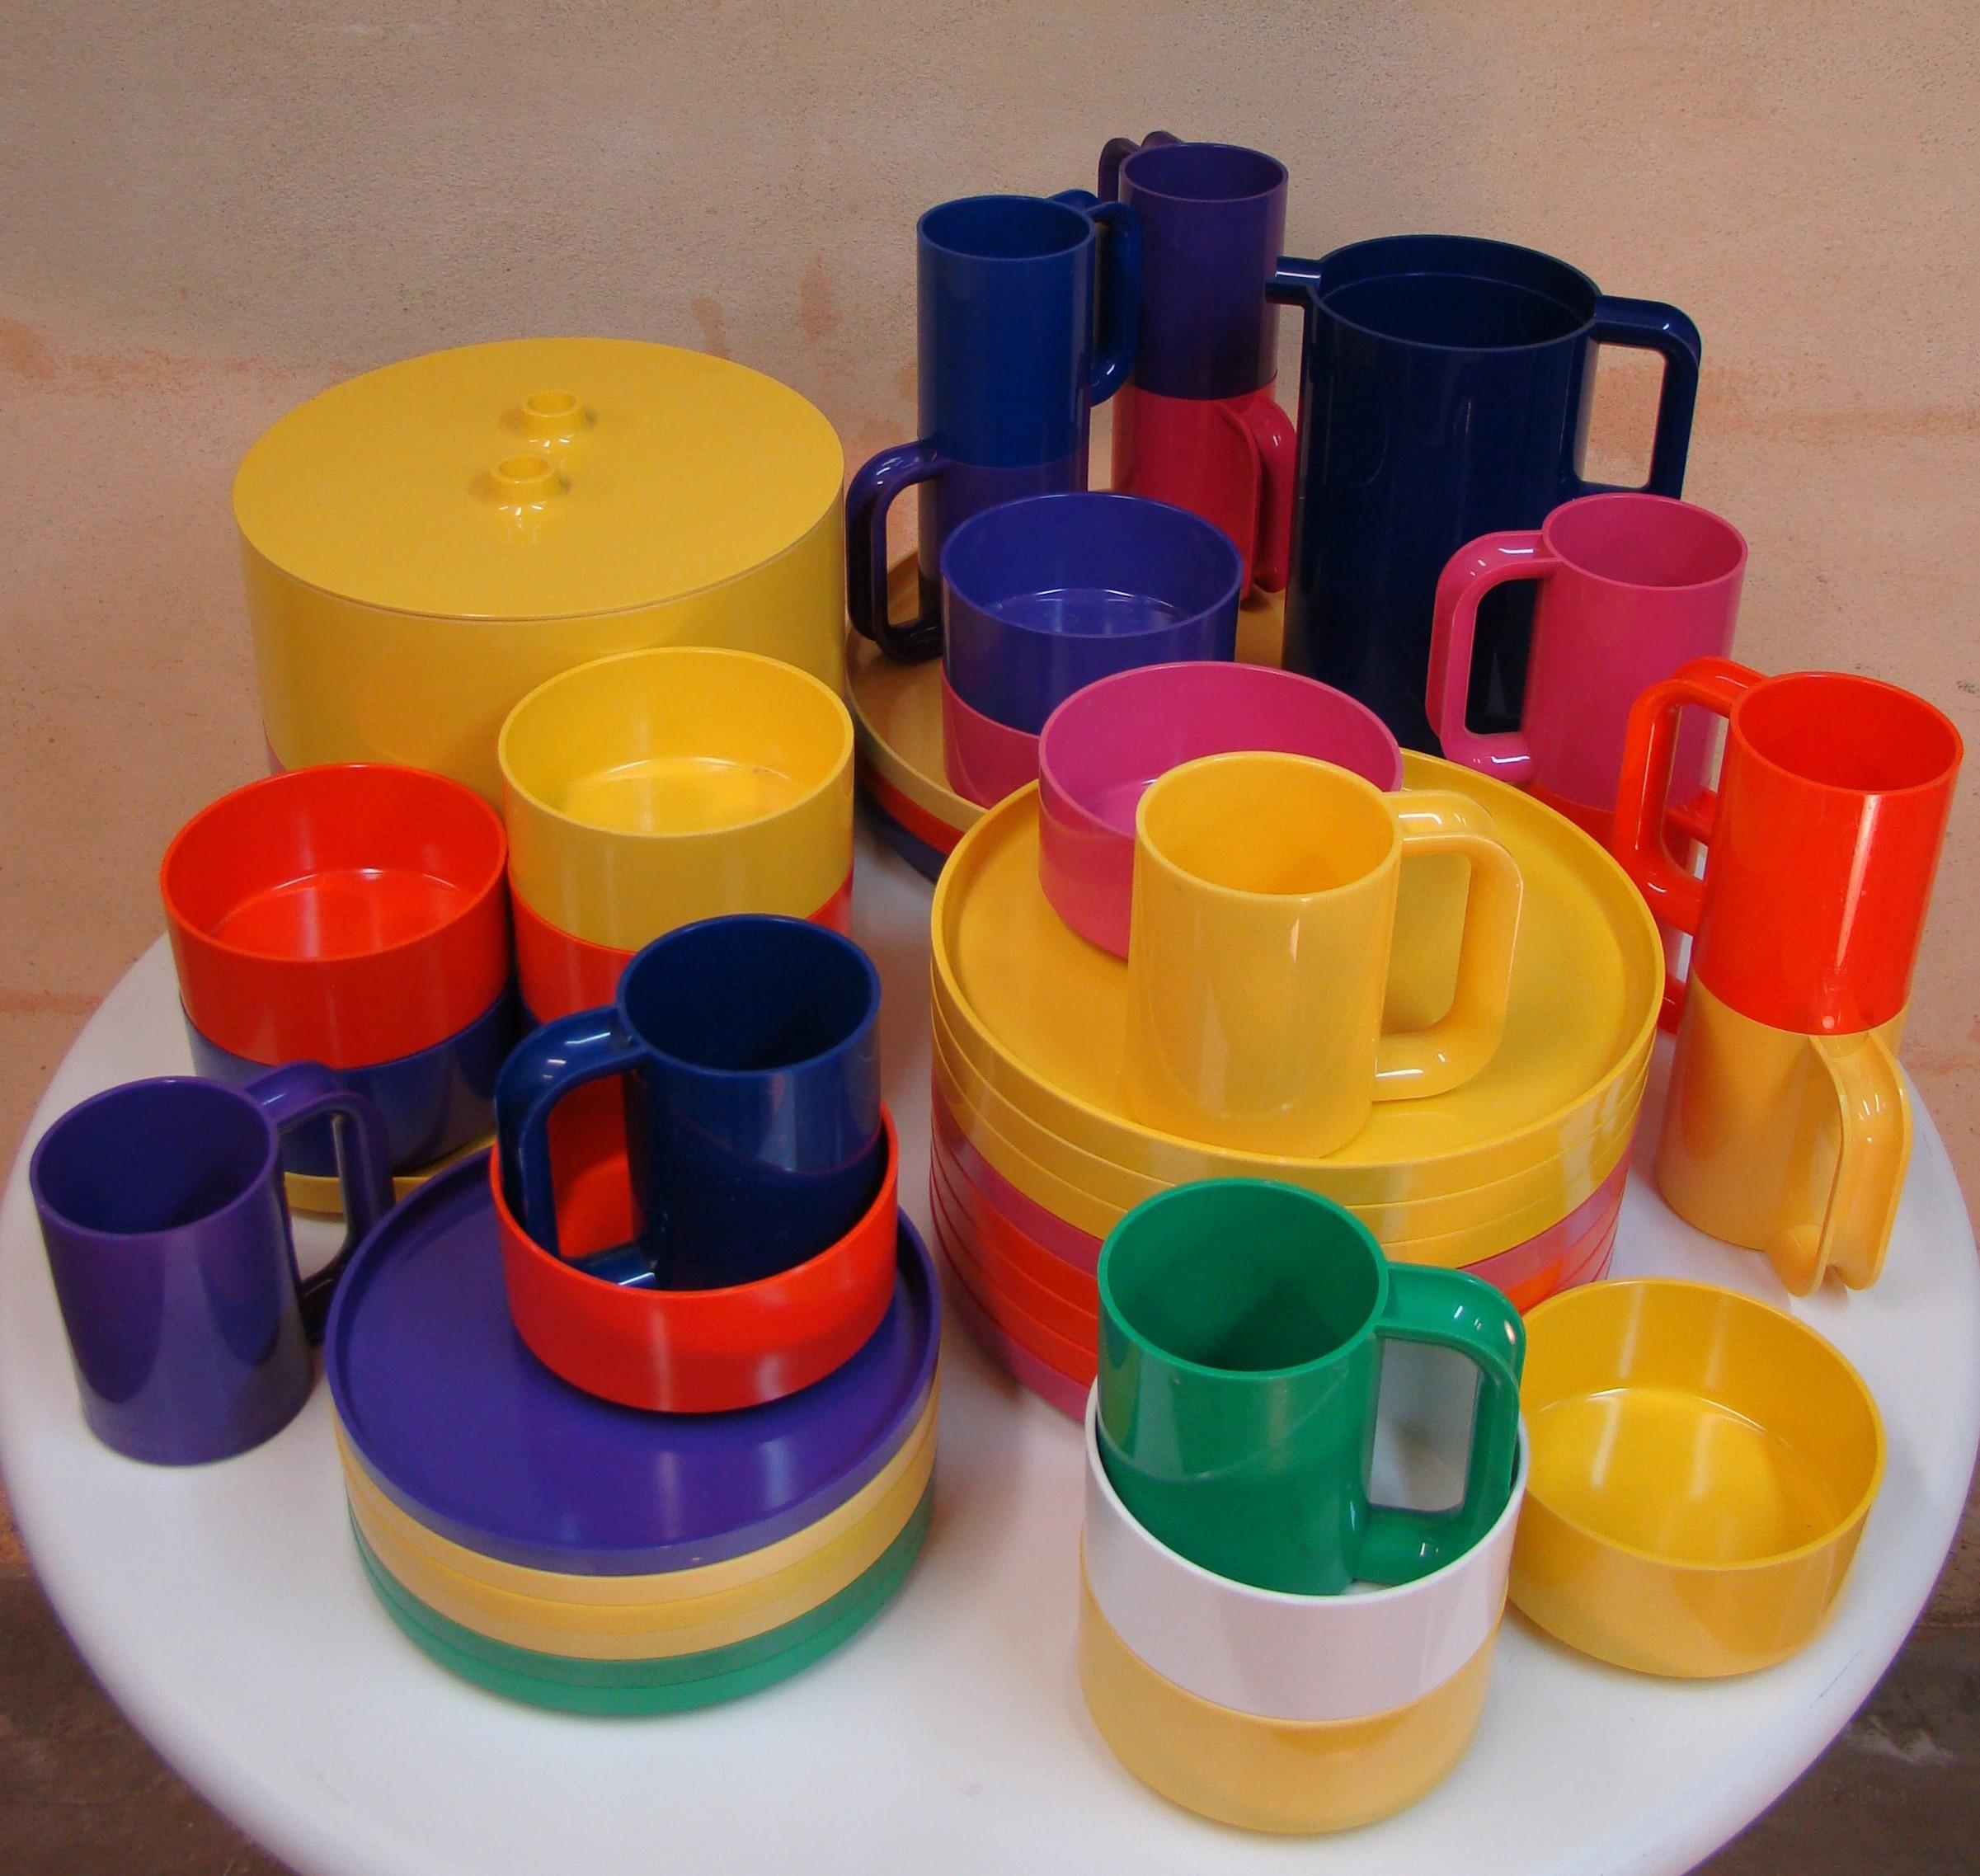 Colorful Assortment of Dinnerware by Massimo Vignelli for Heller Design 5